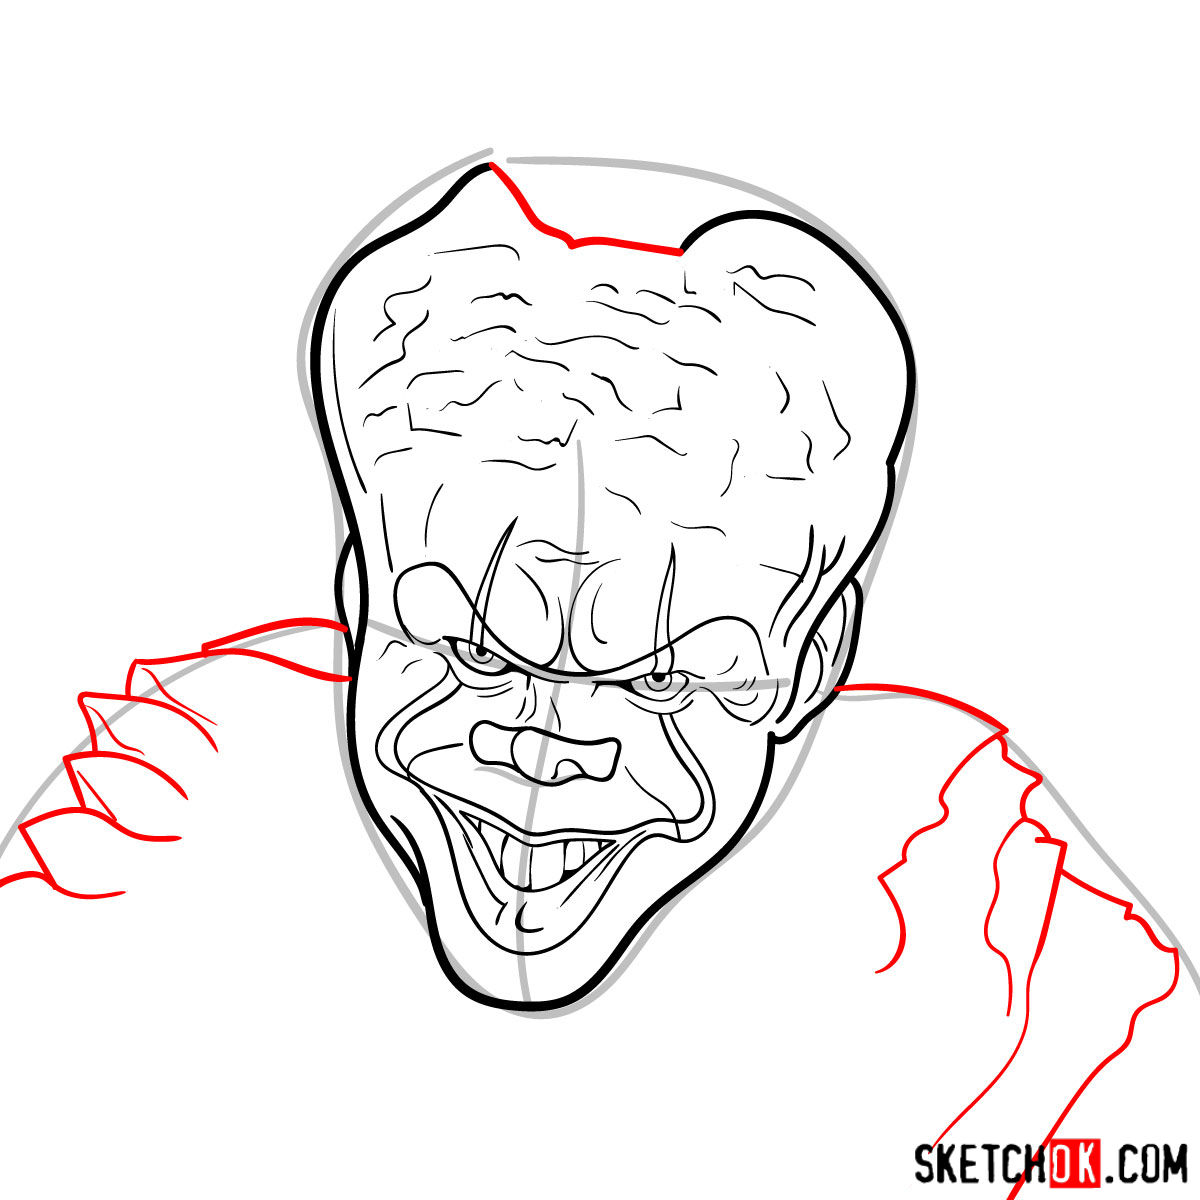 How to draw Pennywise the Dancing Clown step by step - step 09